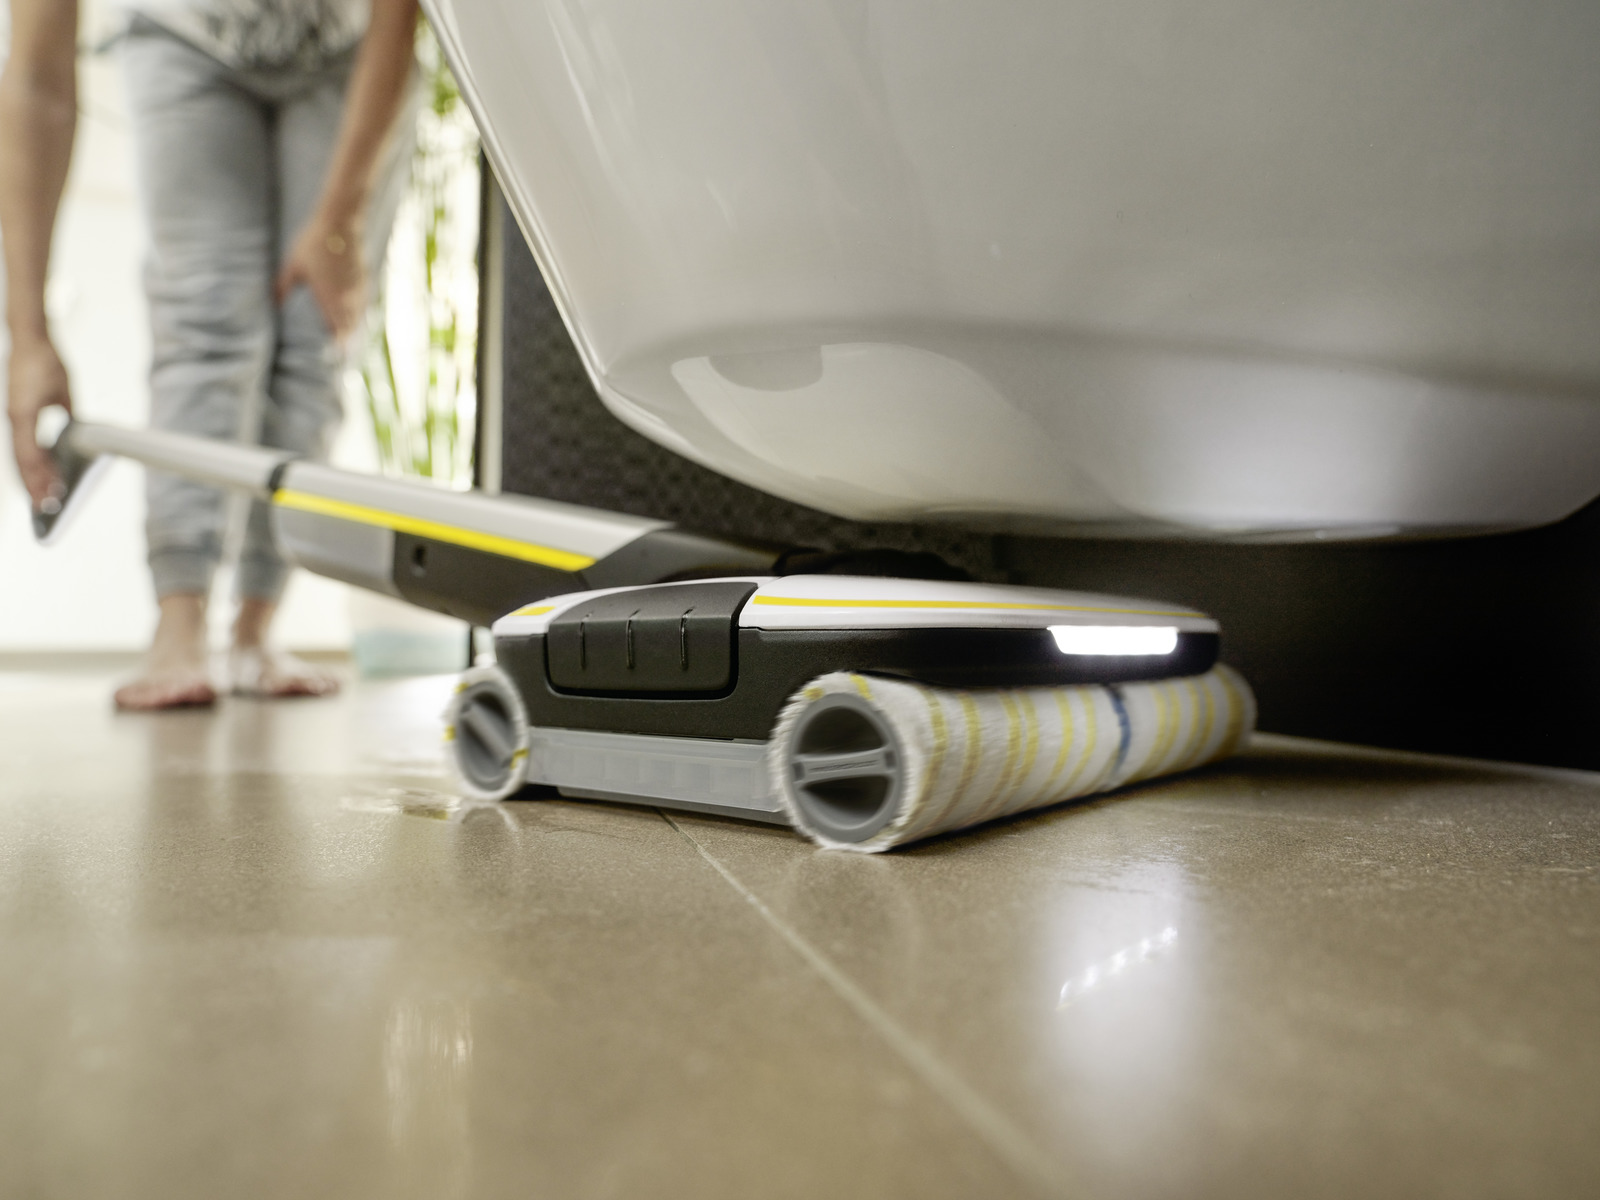 Karcher FC 3 Premium Electric Mop With Spray Clear